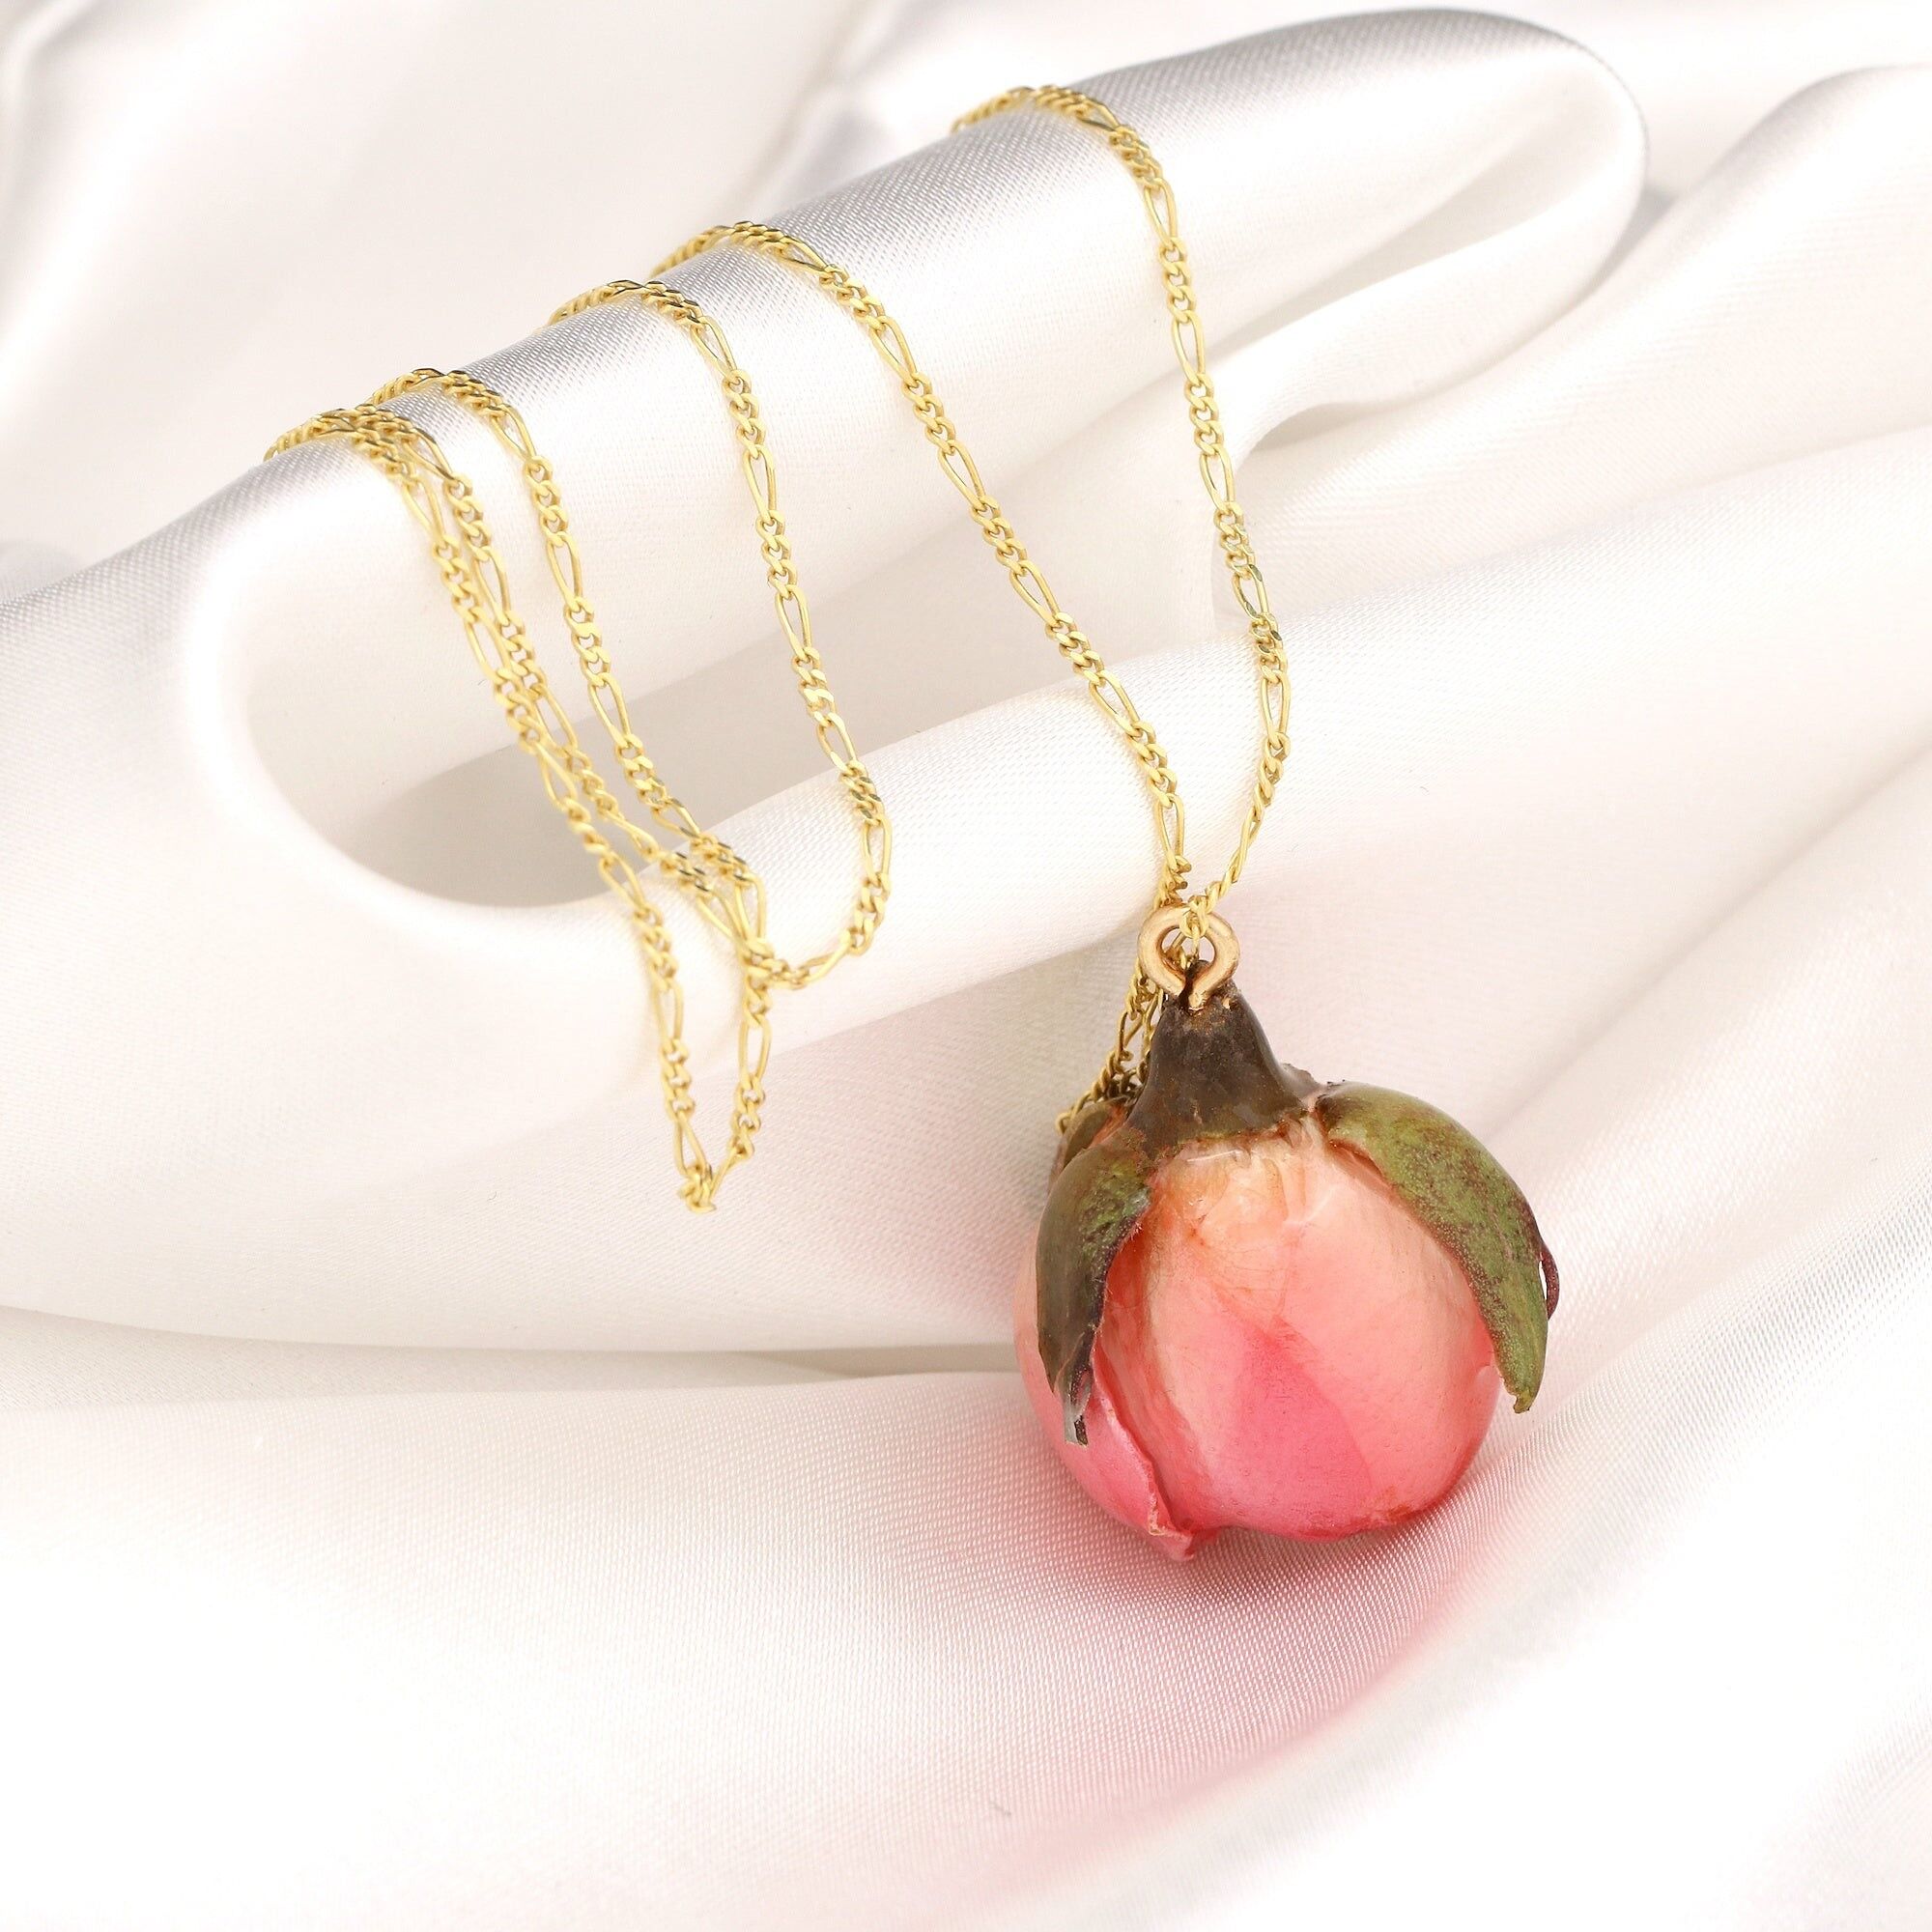 Buy wholesale Real Rose Necklace - 925 Sterling Gold Plated Chain with  Resin Cast - K925-58